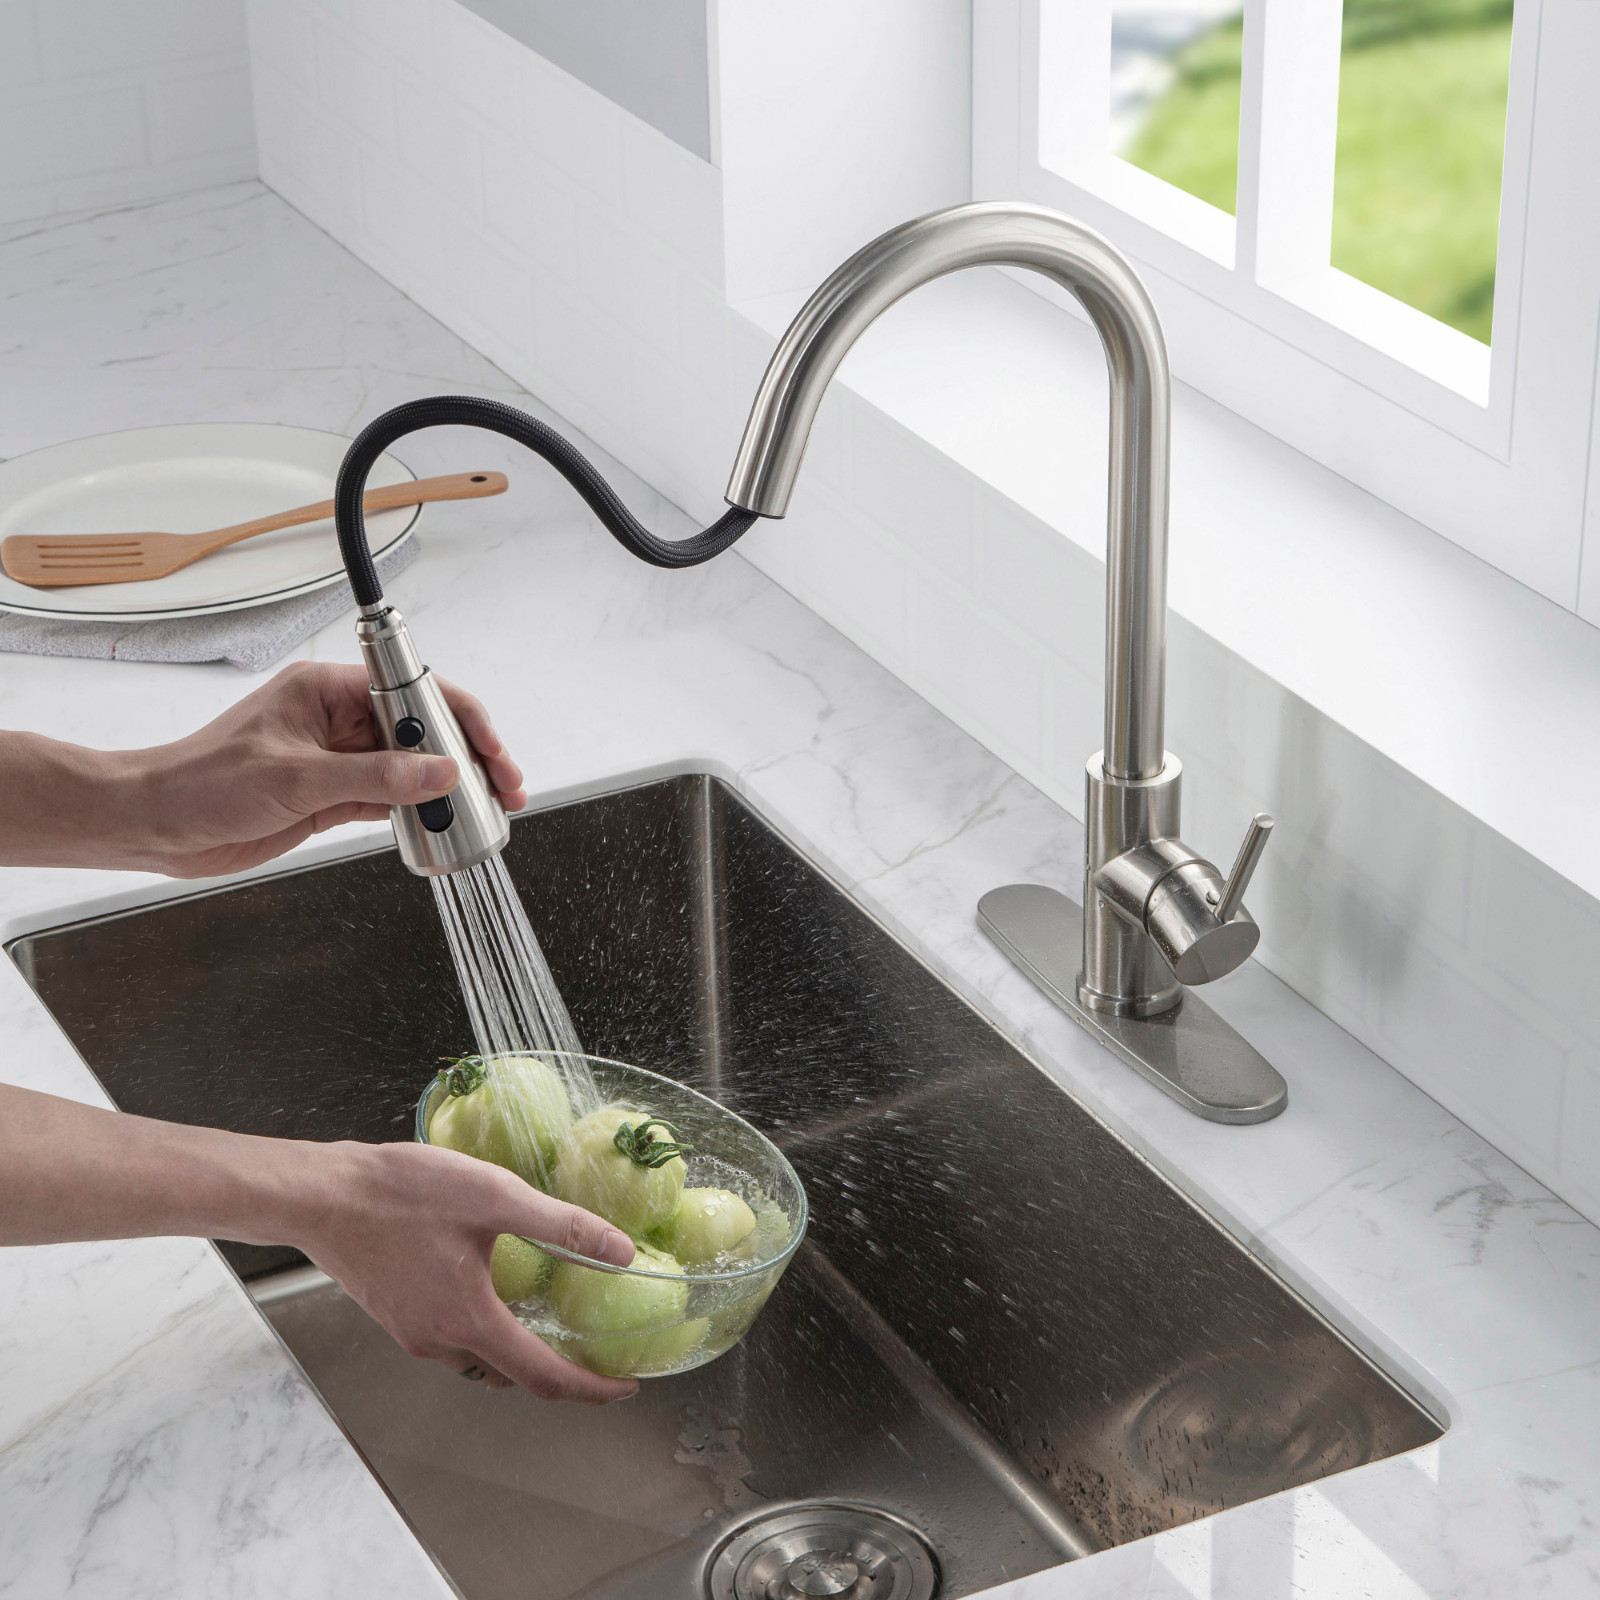  WOODBRIDGE WK090801BN Stainless Steel Single Handle Pull Down Kitchen Faucet in Brushed Nickel Finish._9392